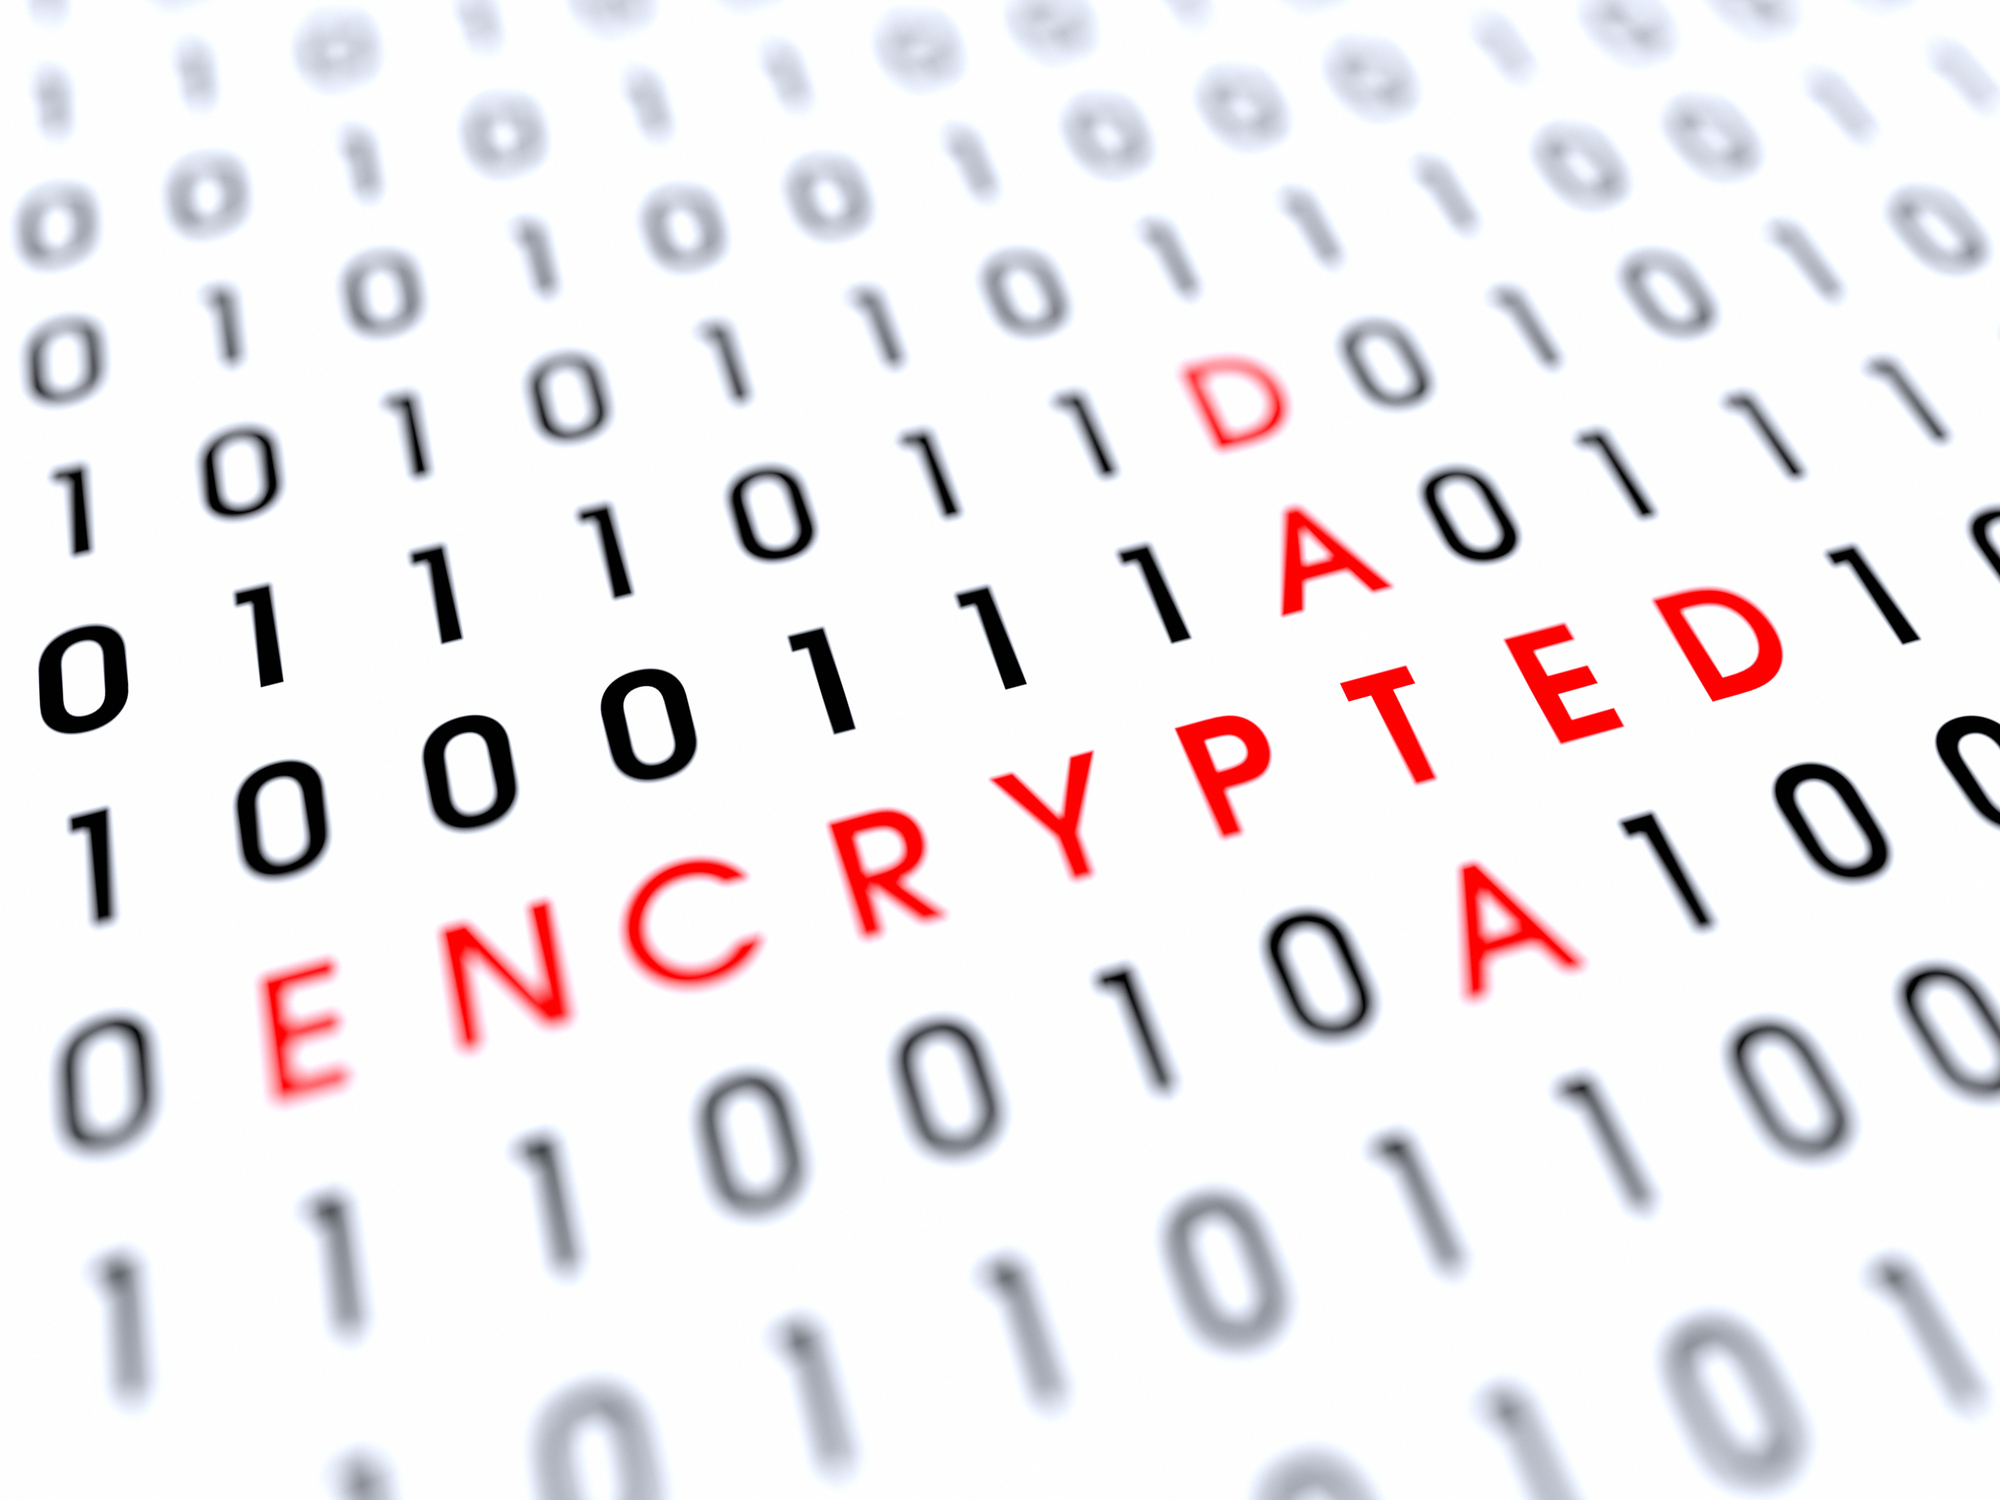  Protect your data by using VeraCrypt to encrypt it 